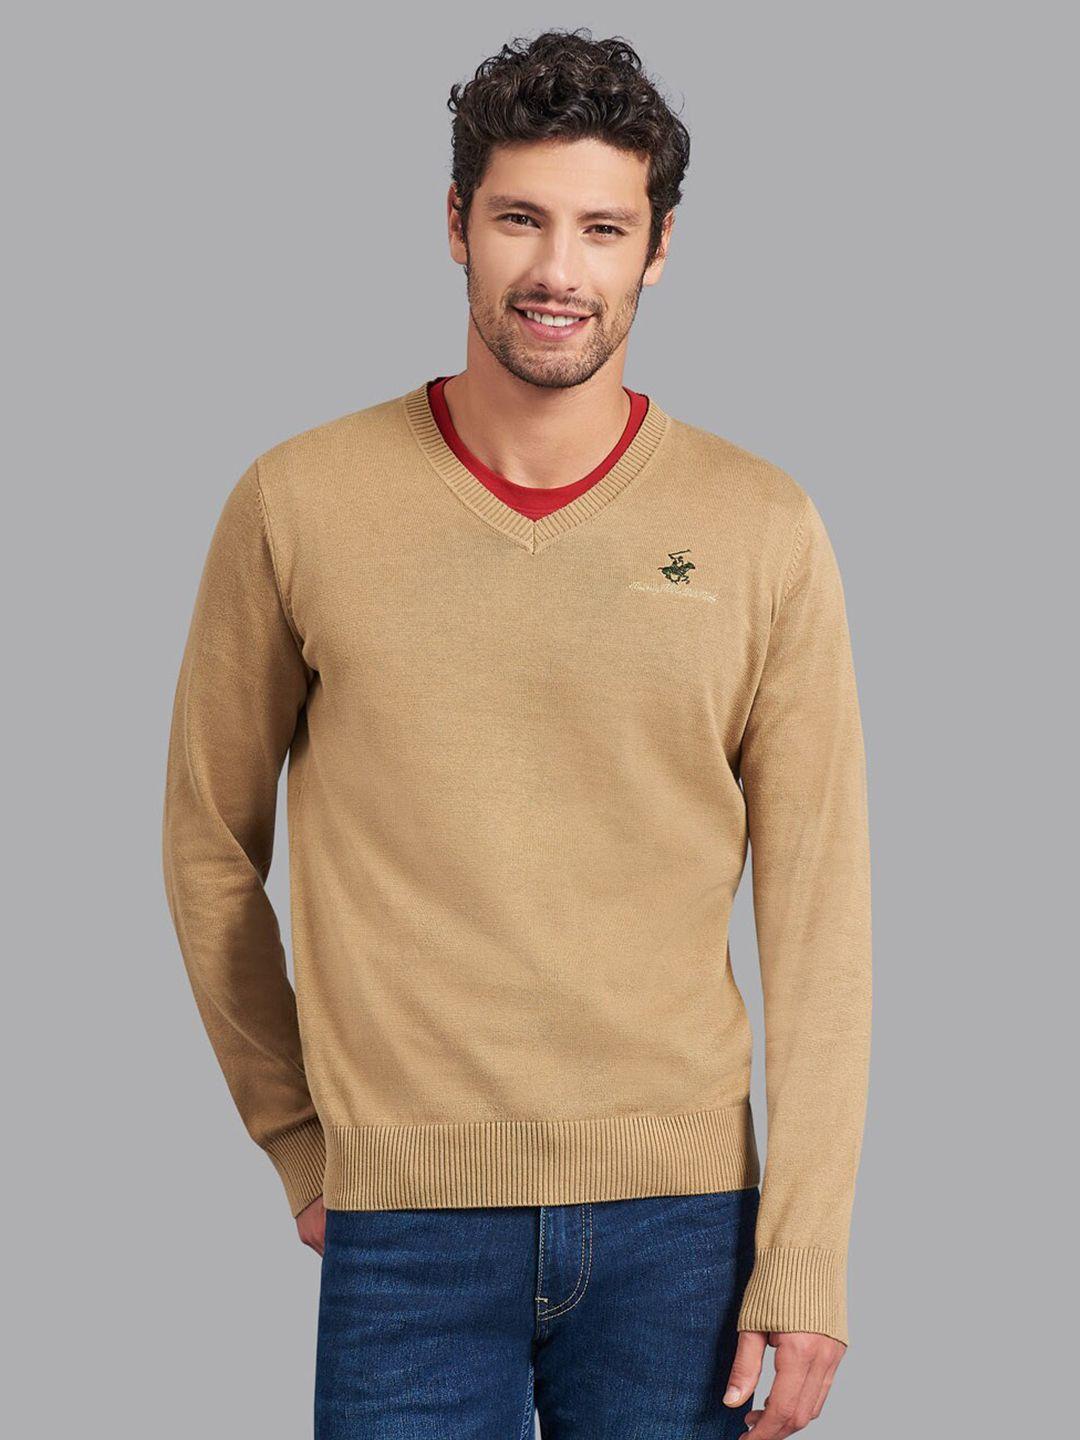 beverly-hills-polo-club-v-neck-cotton-pullover-sweater